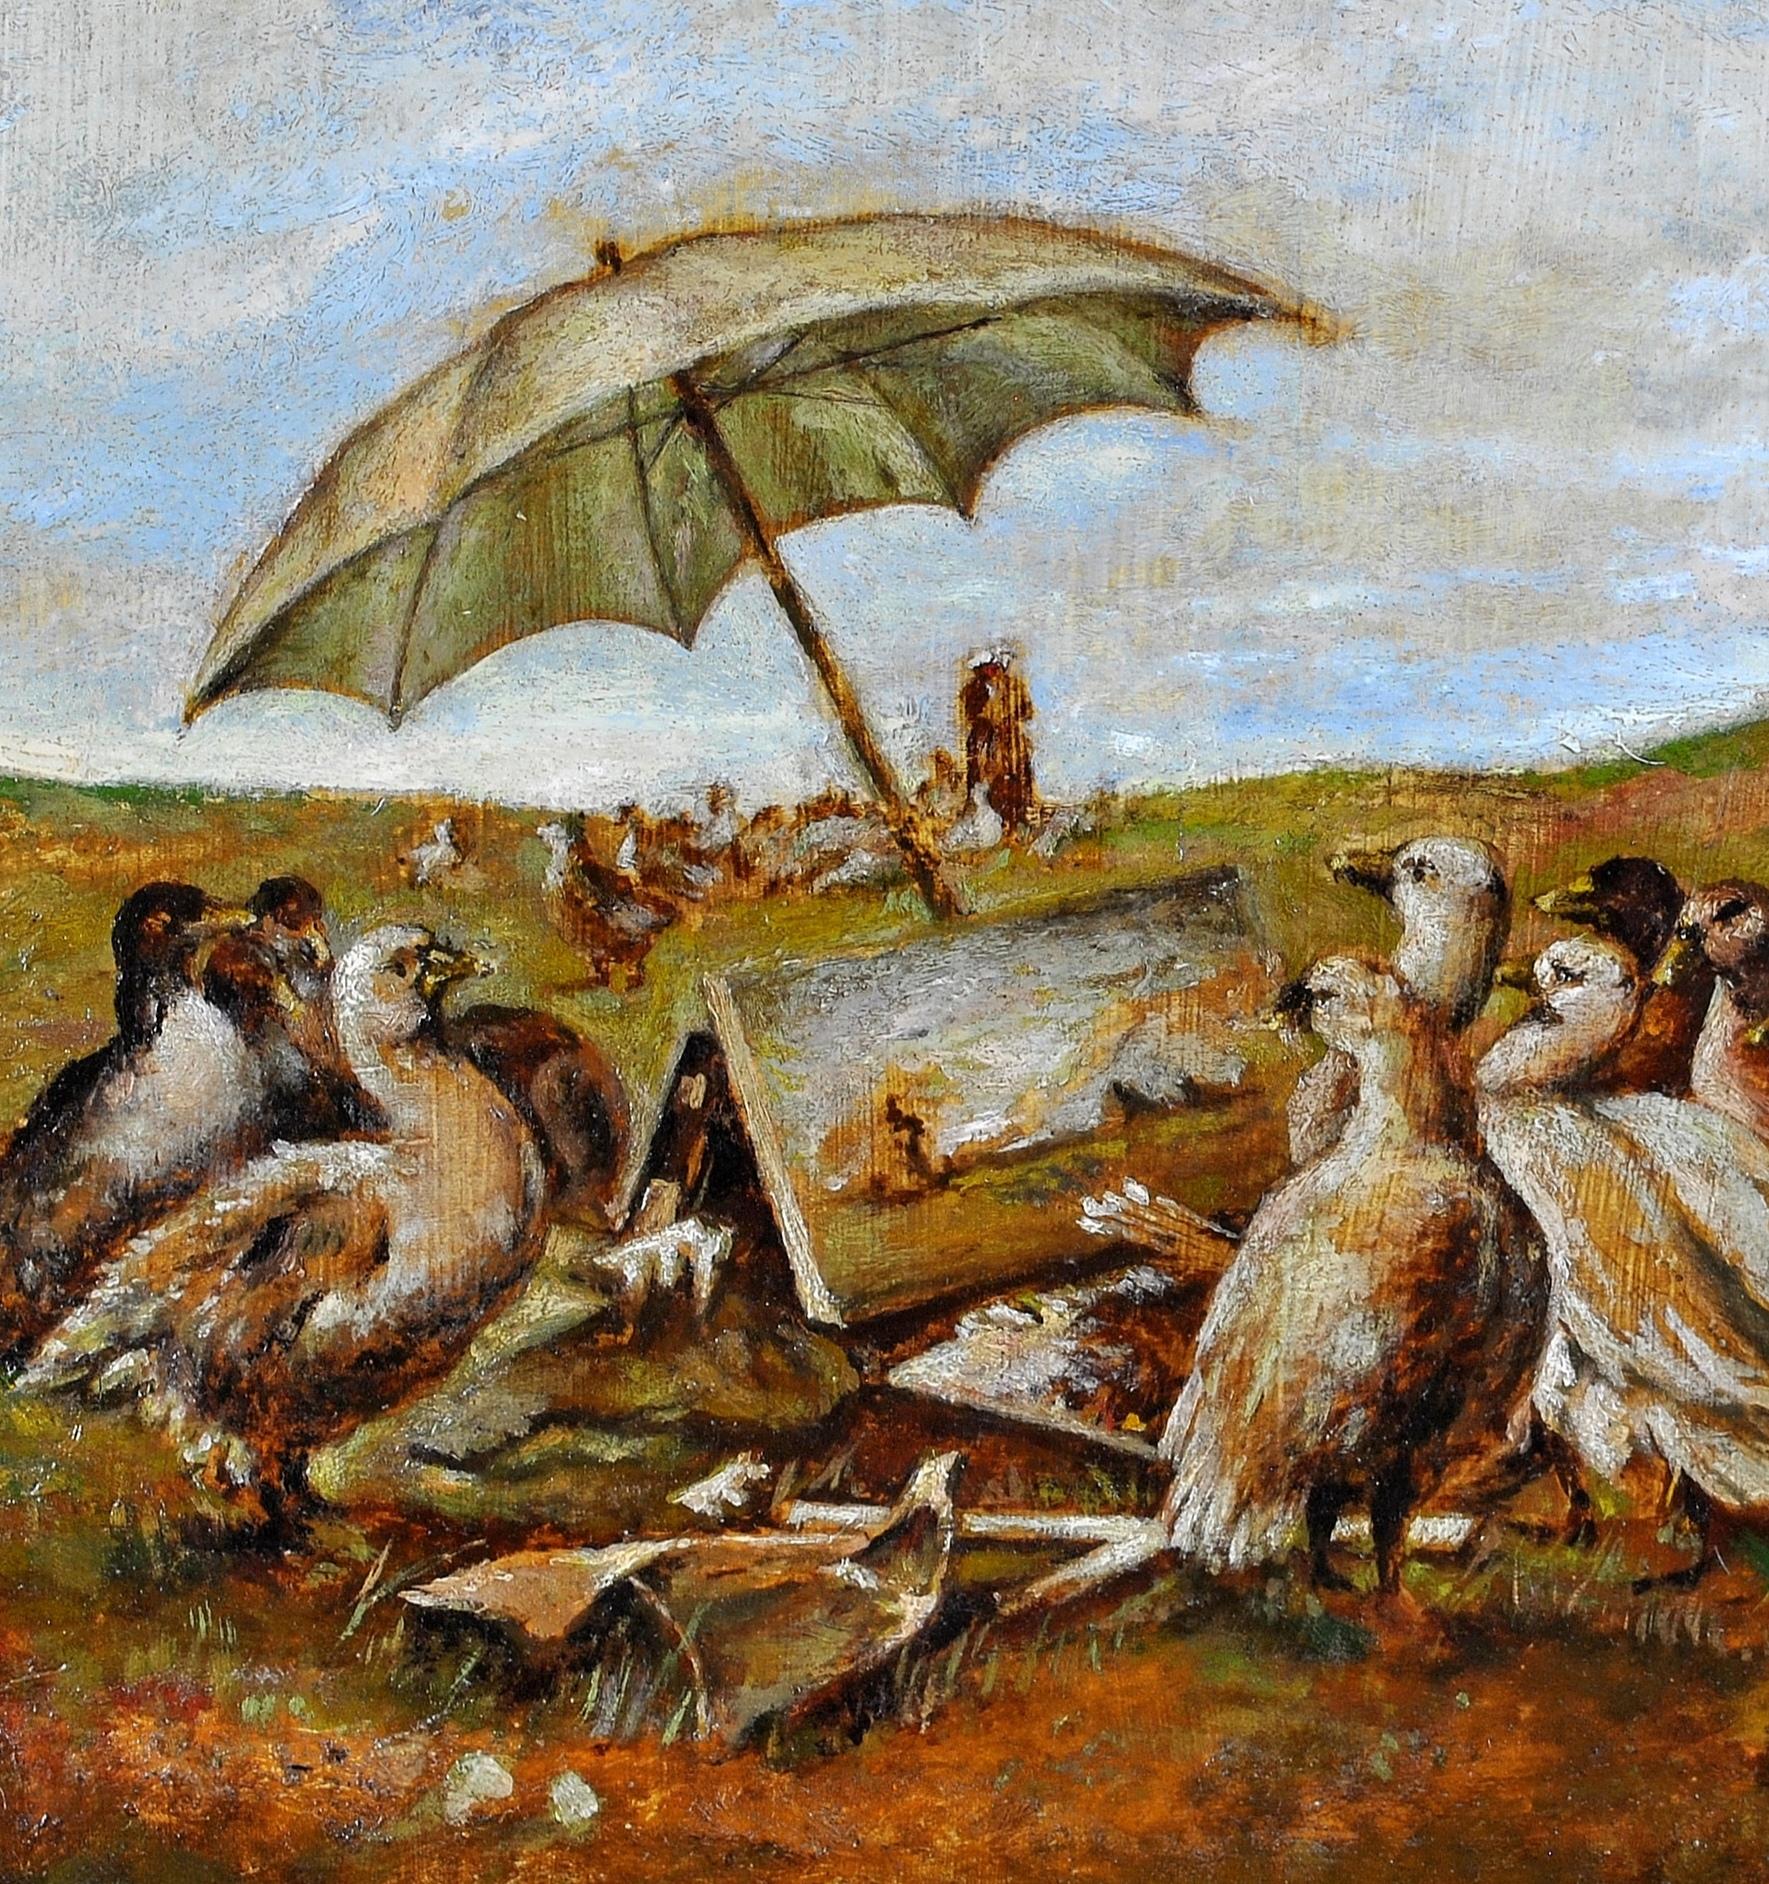 A wonderfully whimsical c. 1920 French oil on mahogany panel depicting a gaggle of geese admiring a painting in a landscape with distant haystacks. Very unusual and interesting work. Presented in a painted frame.

Artist: French School, early 20th